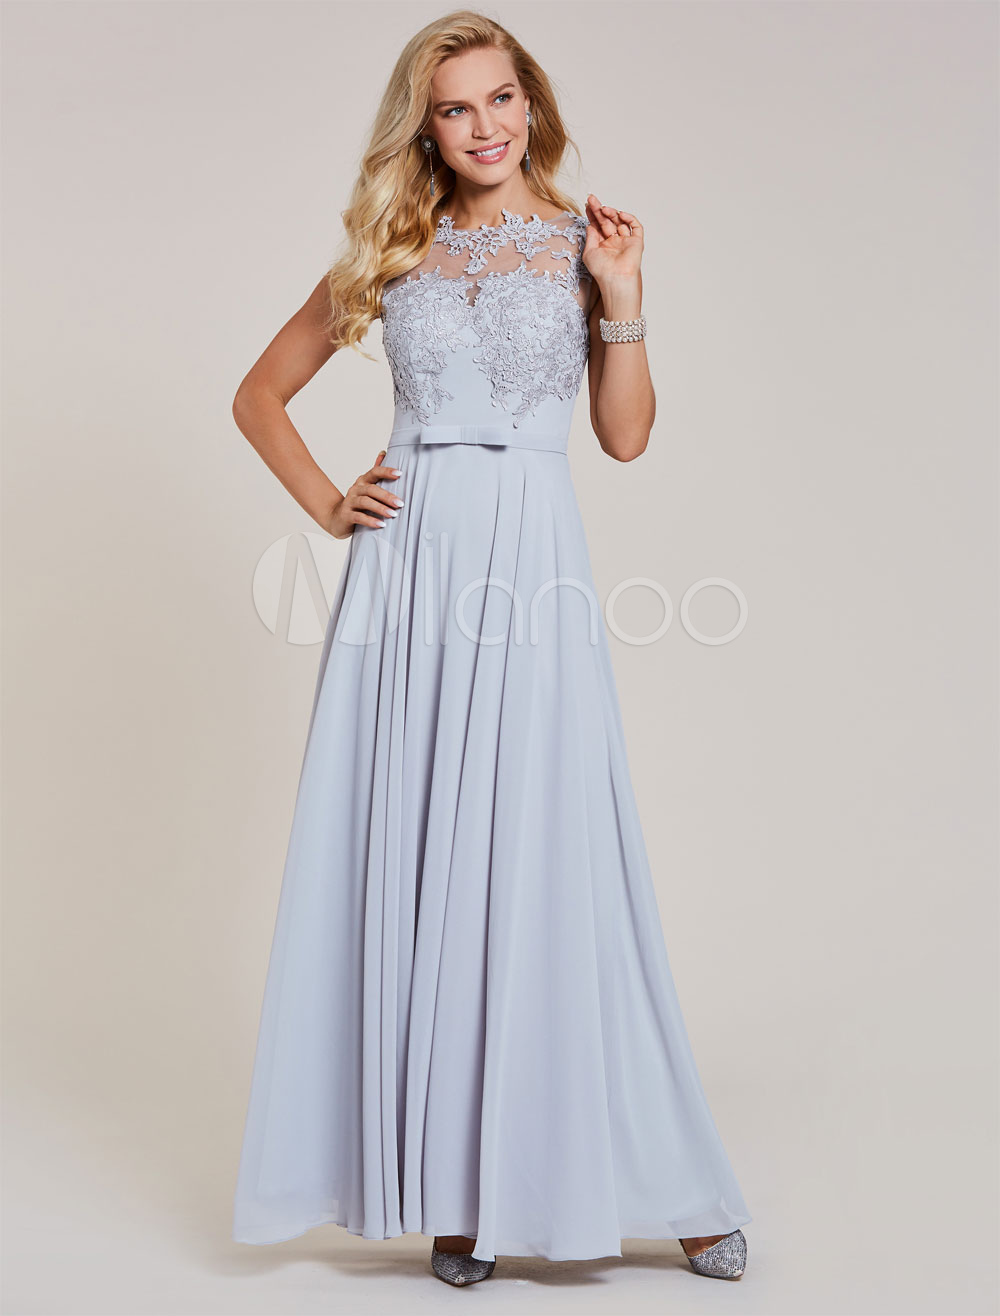 Silver Prom Dresses Long Chiffon Evening Gowns Lace Applique Illusion Floor Length Bow Sash Formal Occasion Dress (Wedding Cheap Party Dress) photo